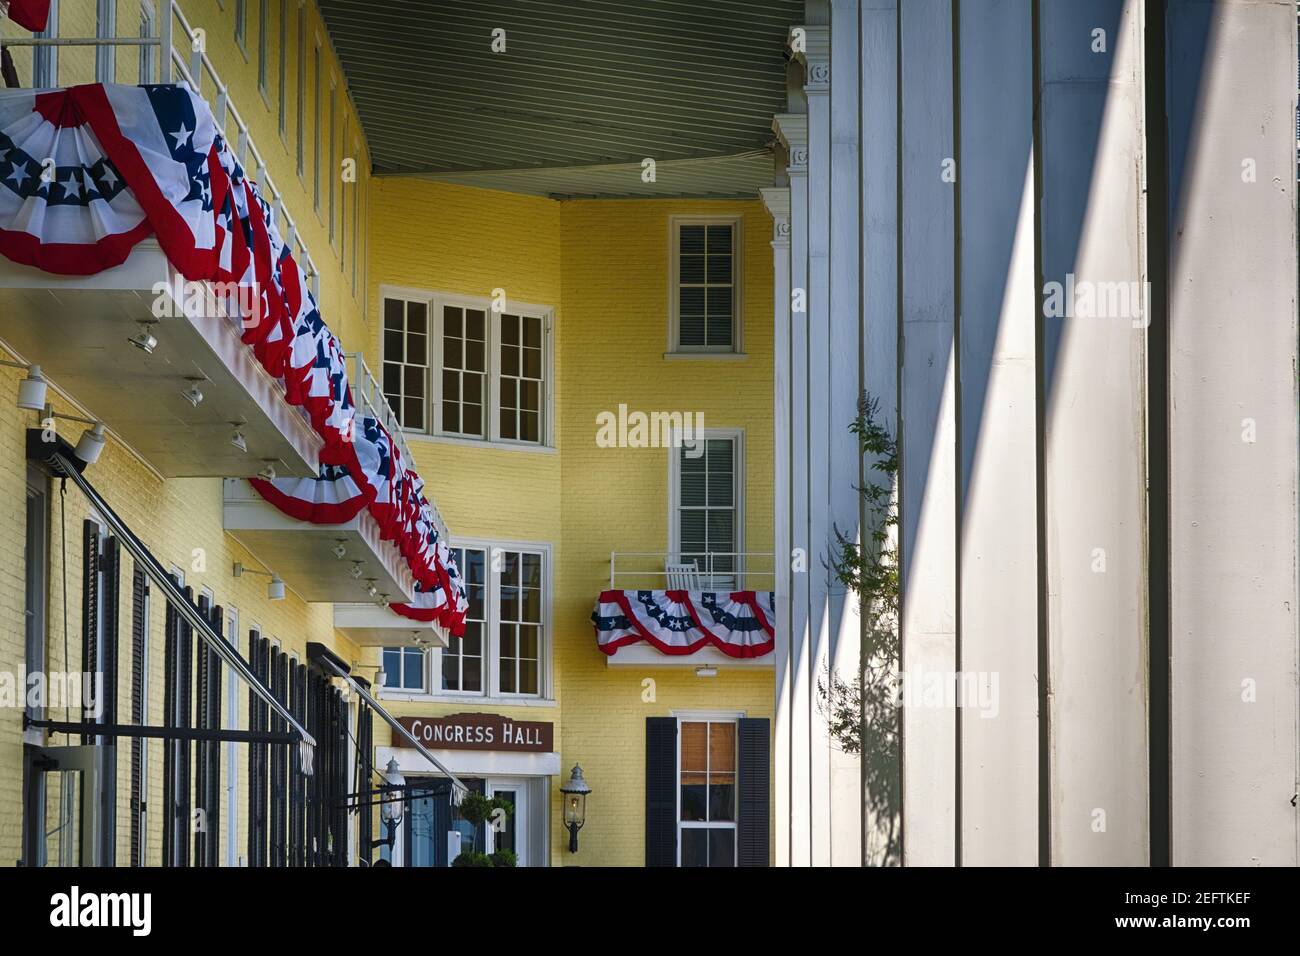 The Terrace Courtyard of the Congress Hall Hotel, Cape May, New Jersey Stockfoto